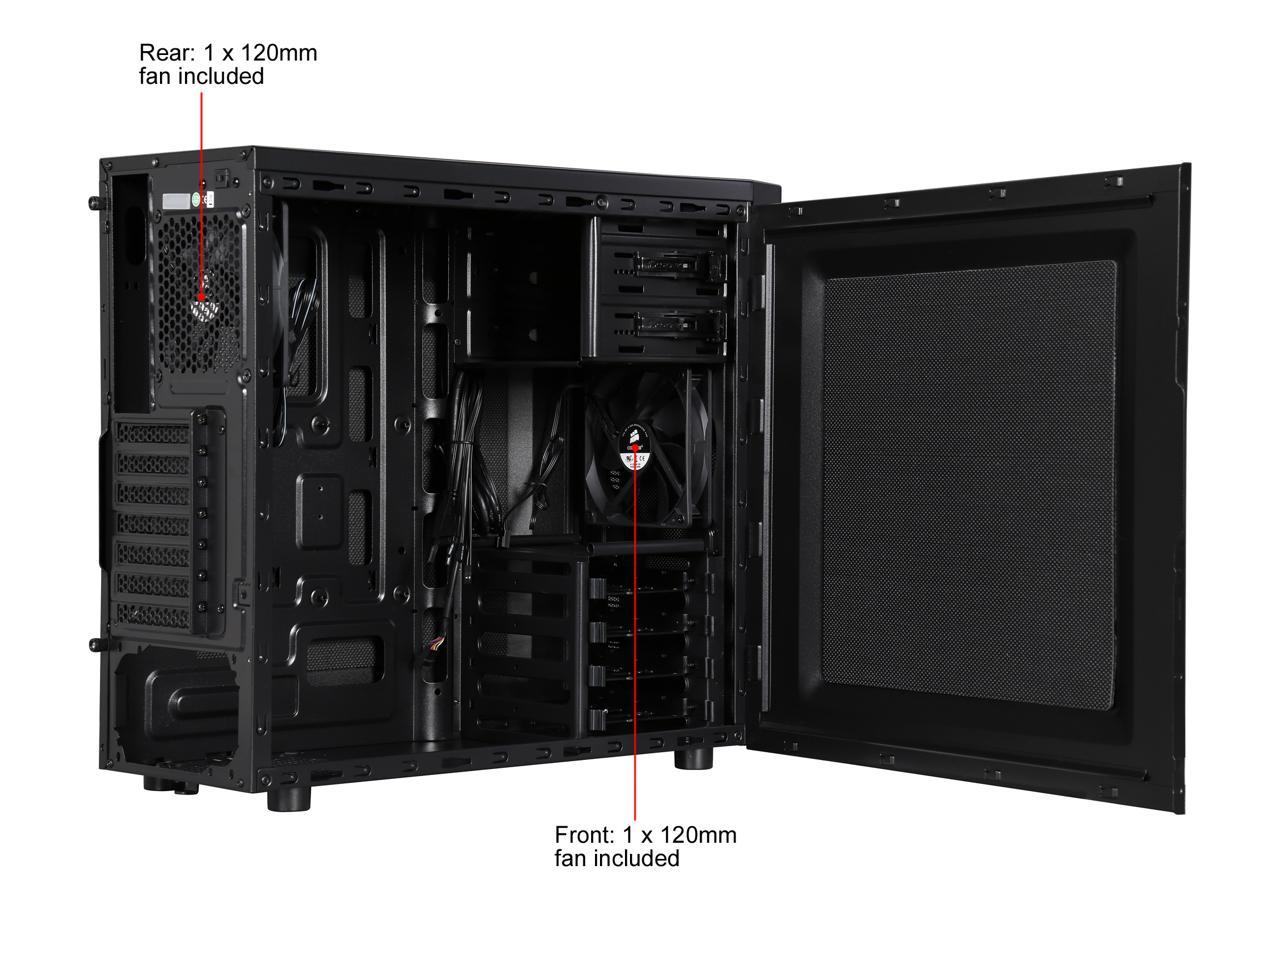 Corsair Carbide Series 100r Silent Edition Cc Ww Black Steel Atx Mid Tower Computer Case Power Supply Not Included Newegg Com